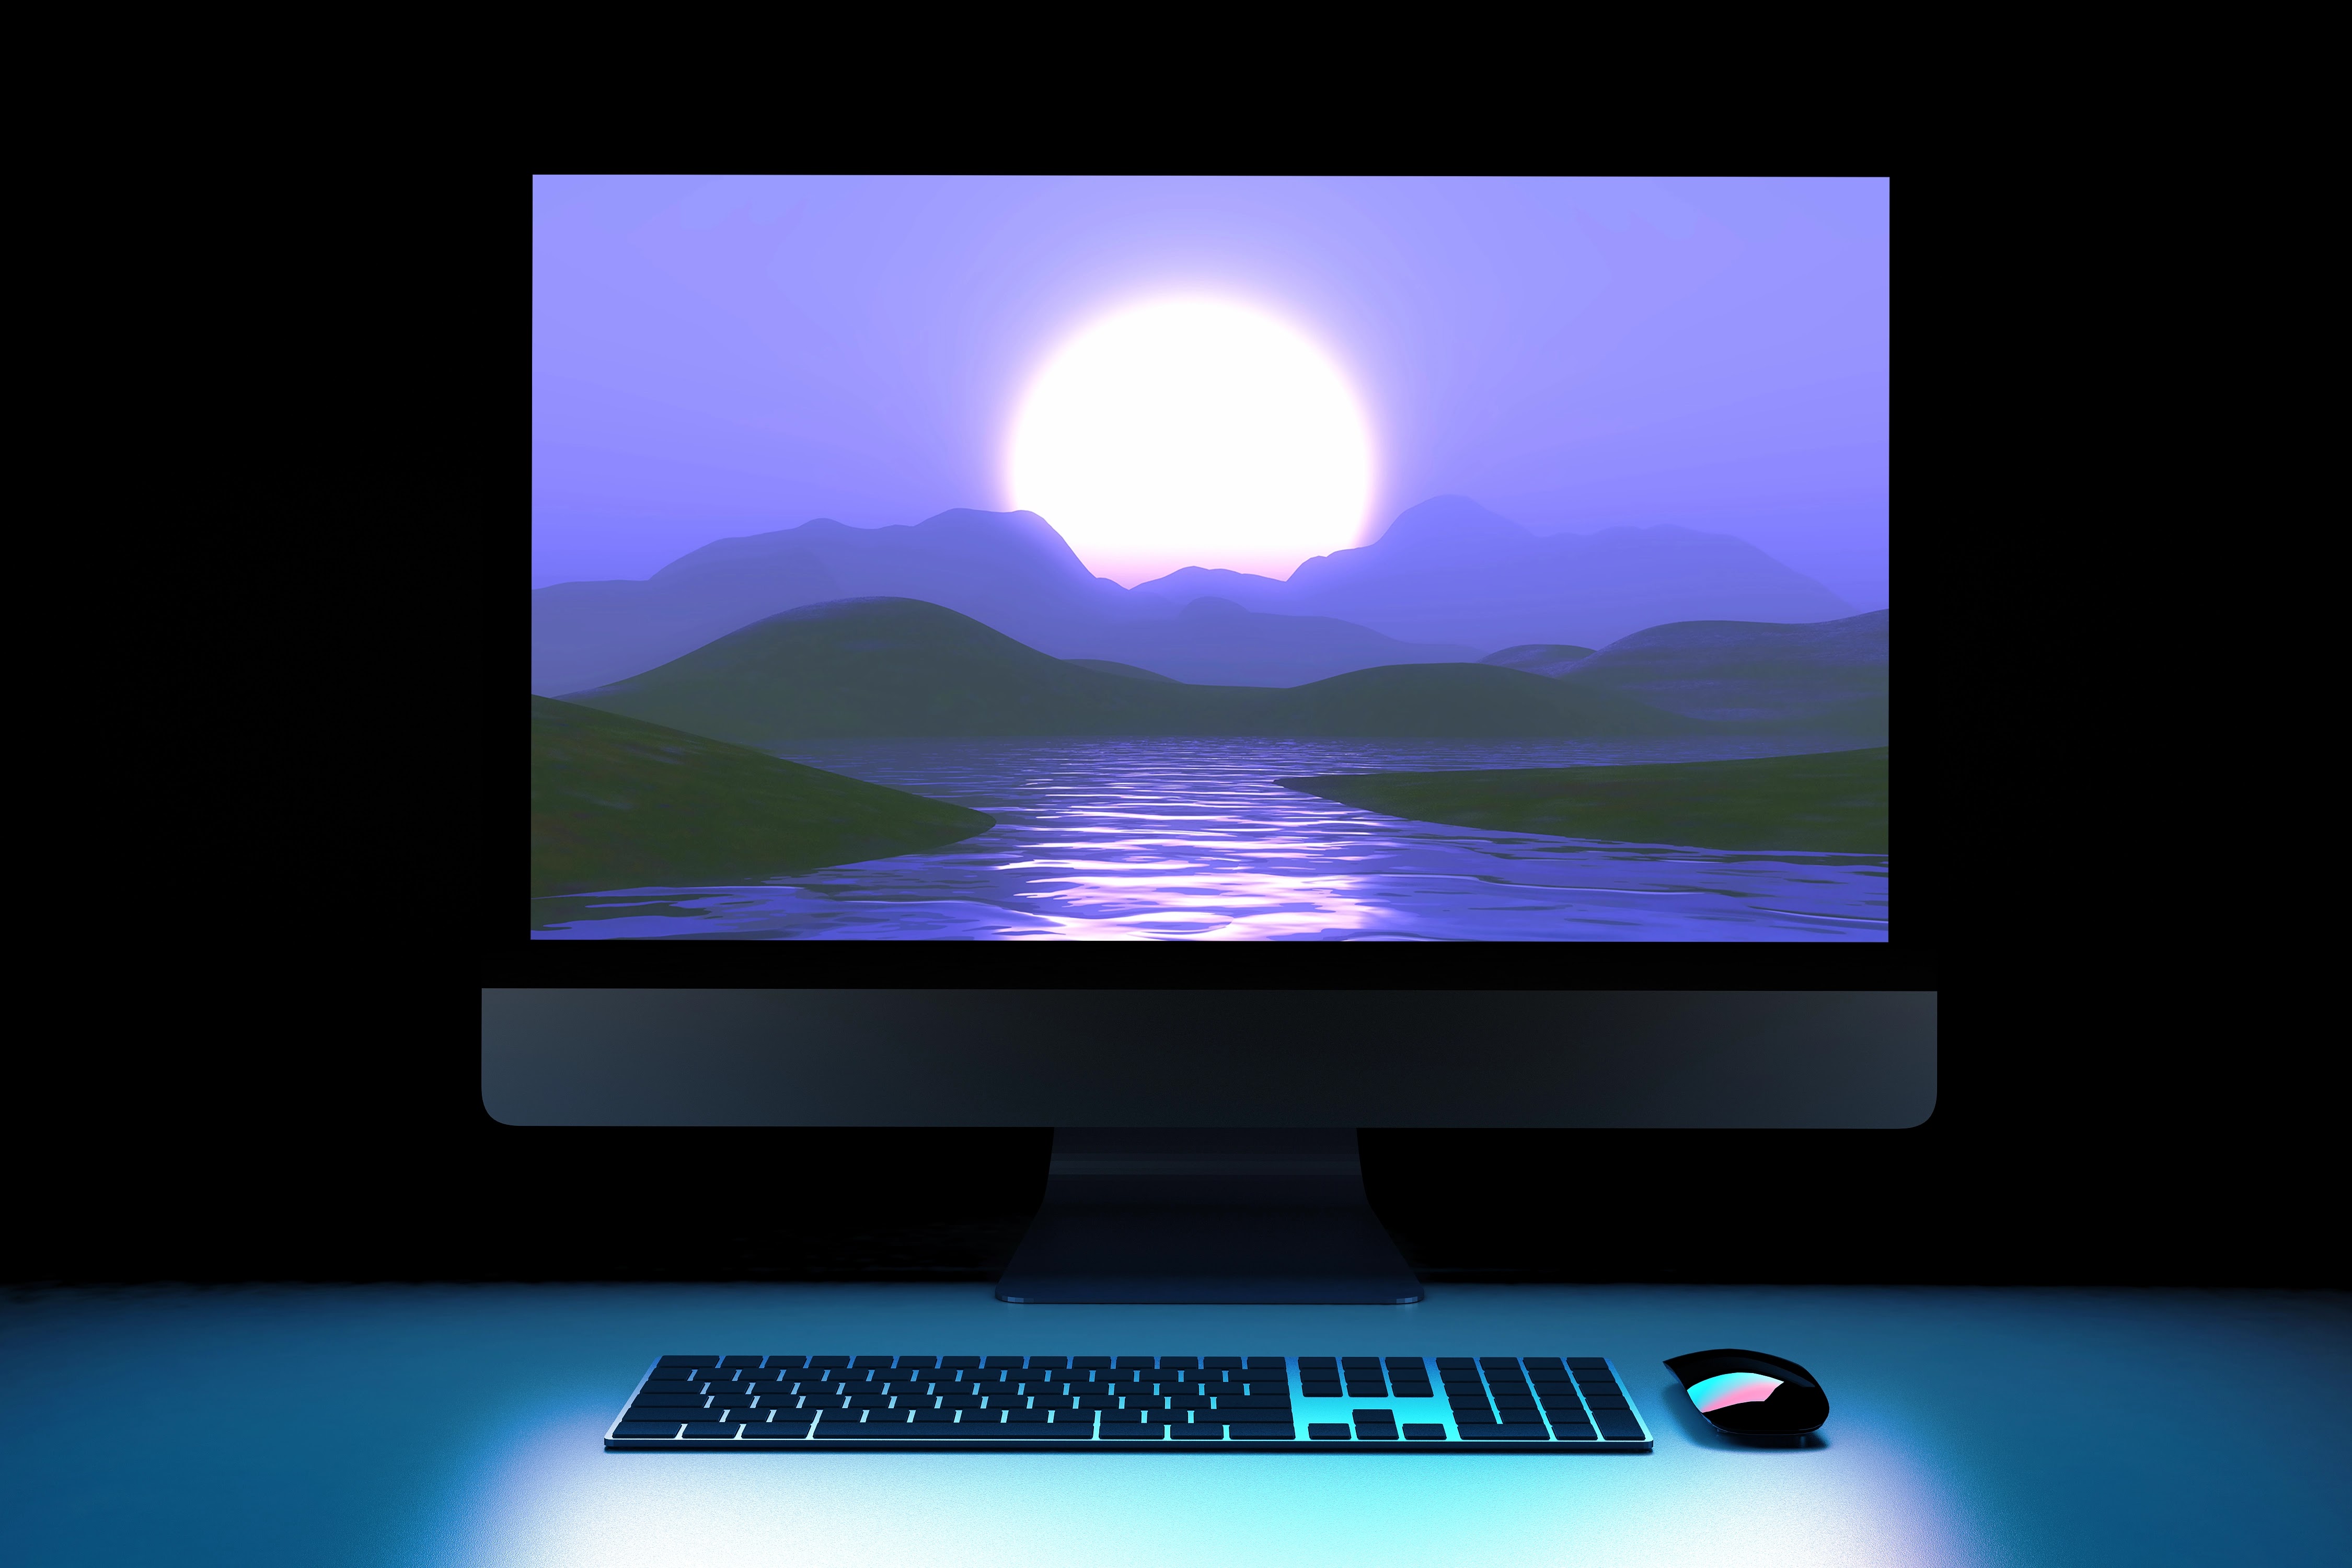 3d mountains and lake against a purple sunset sky background wallpaper 4k for pc desktop and laptop